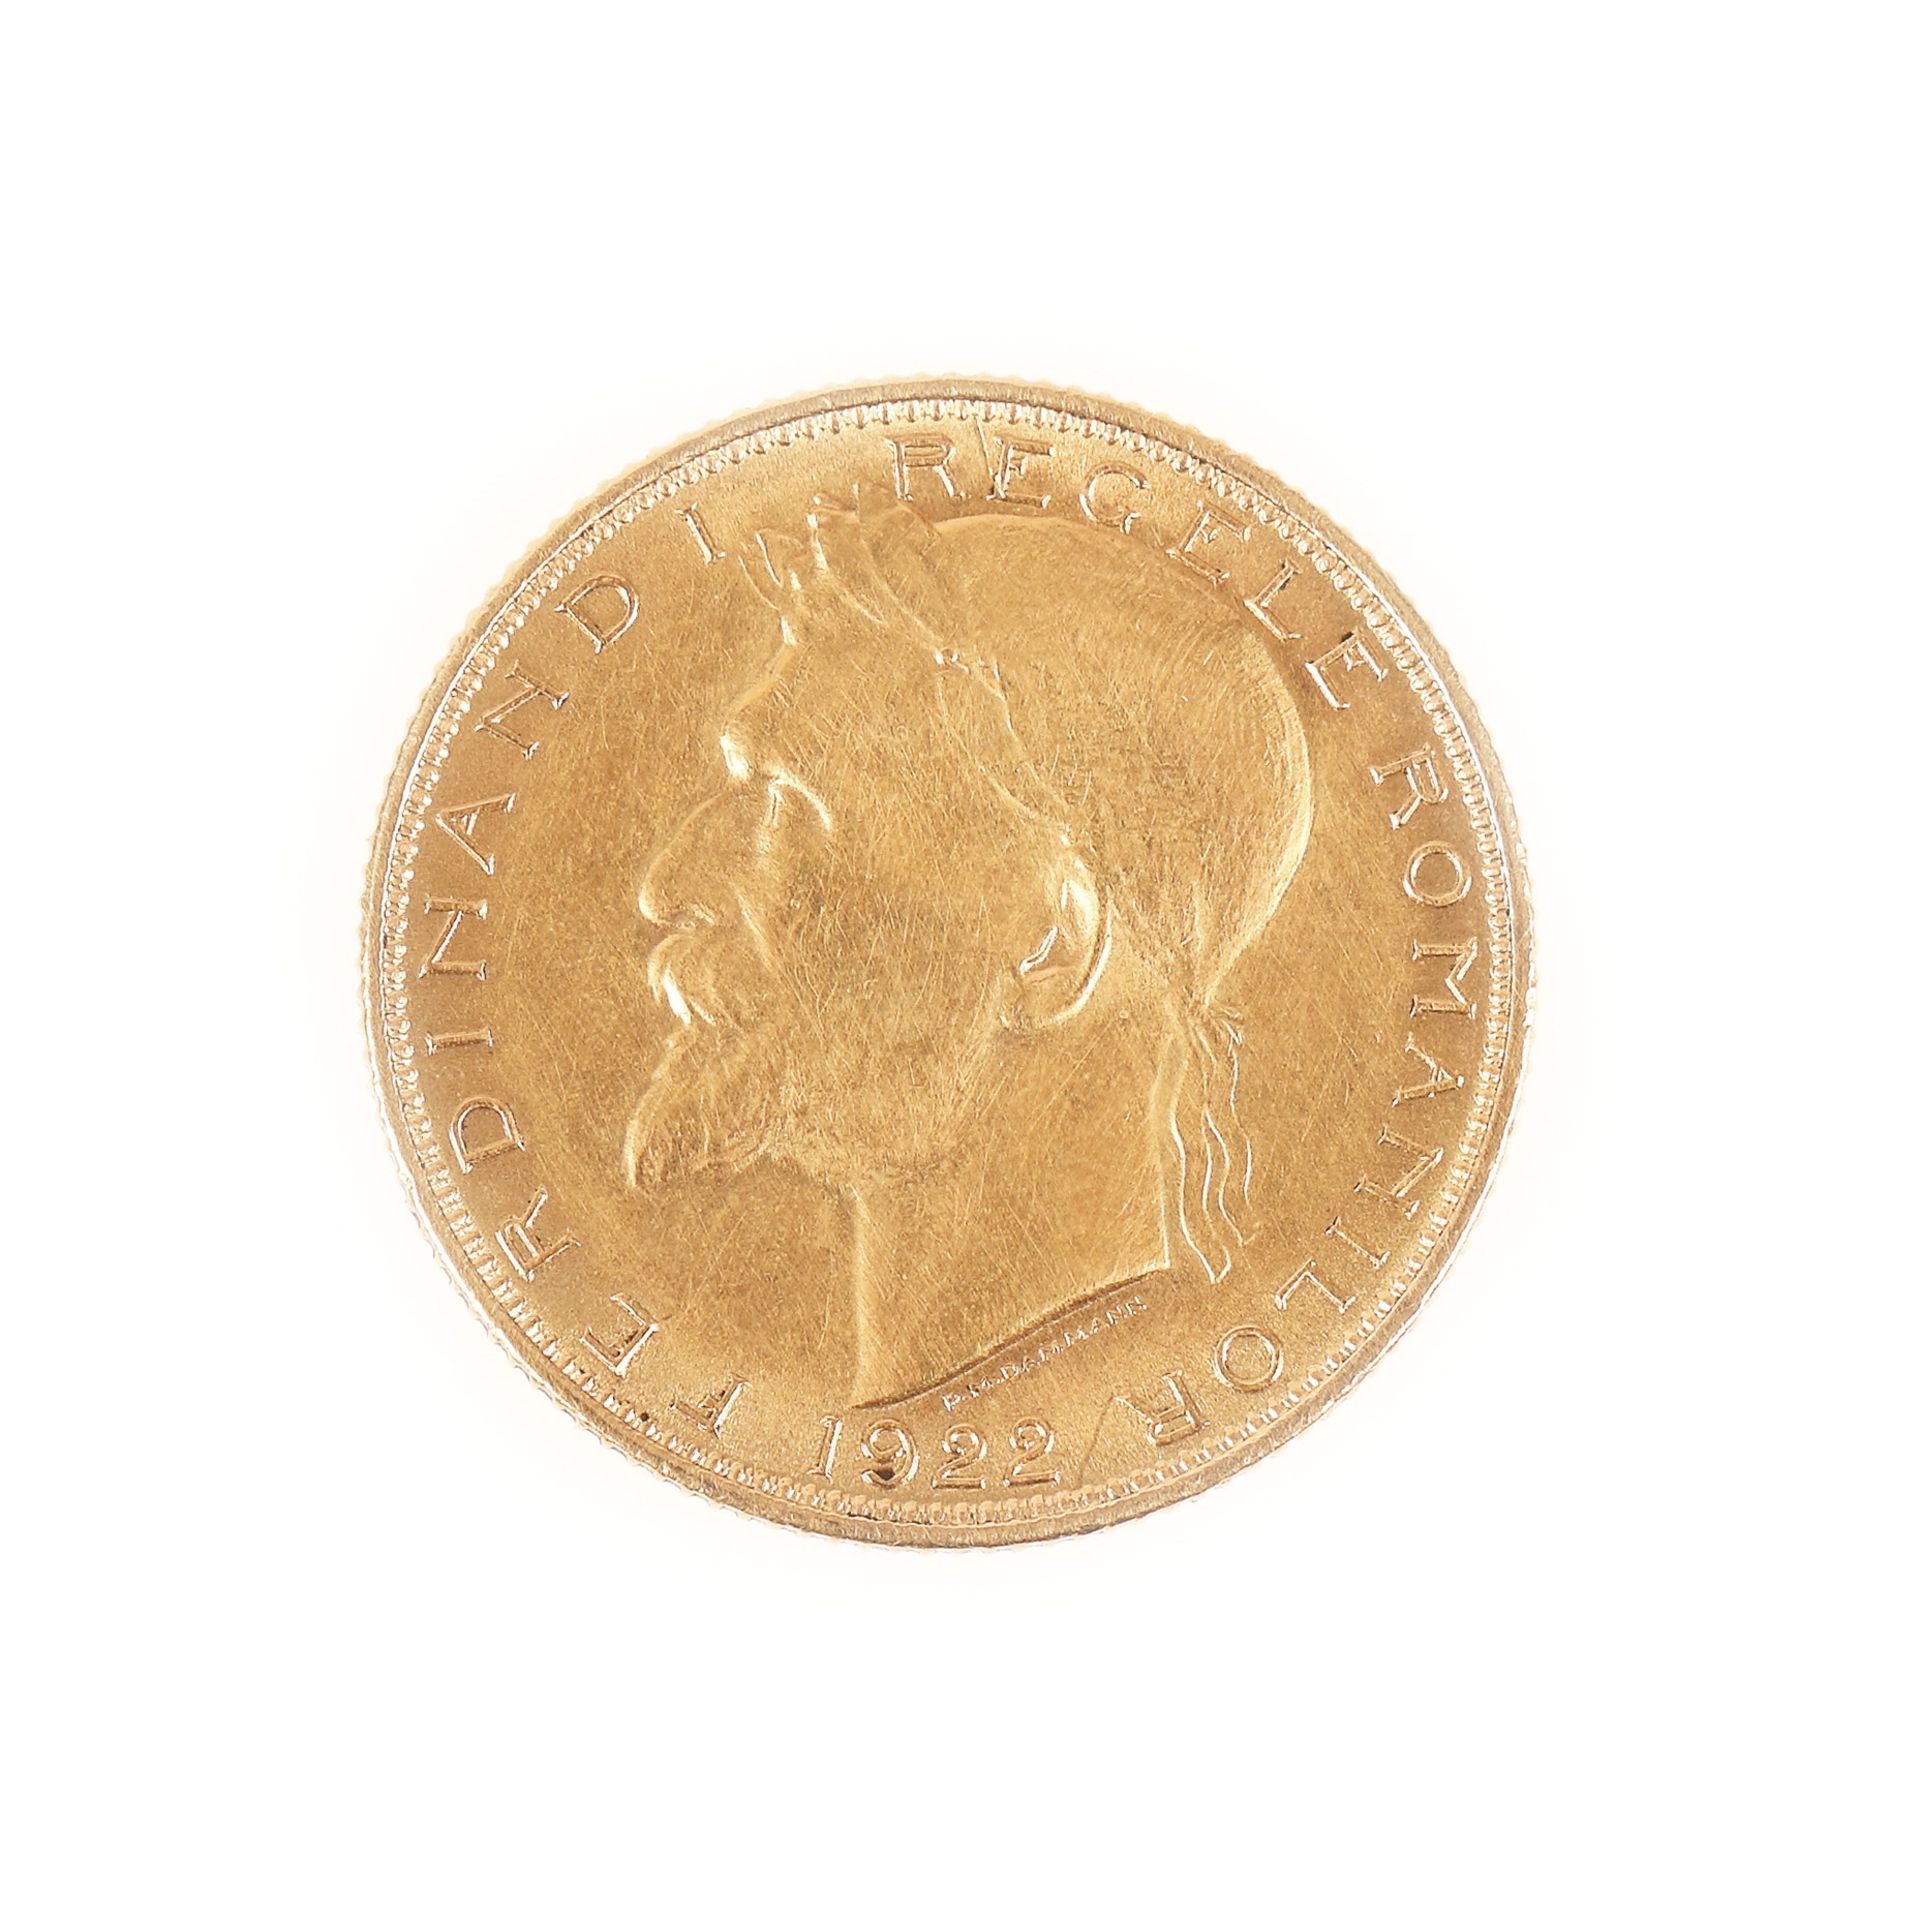 20 Lei 1922 coin, gold - Image 2 of 3